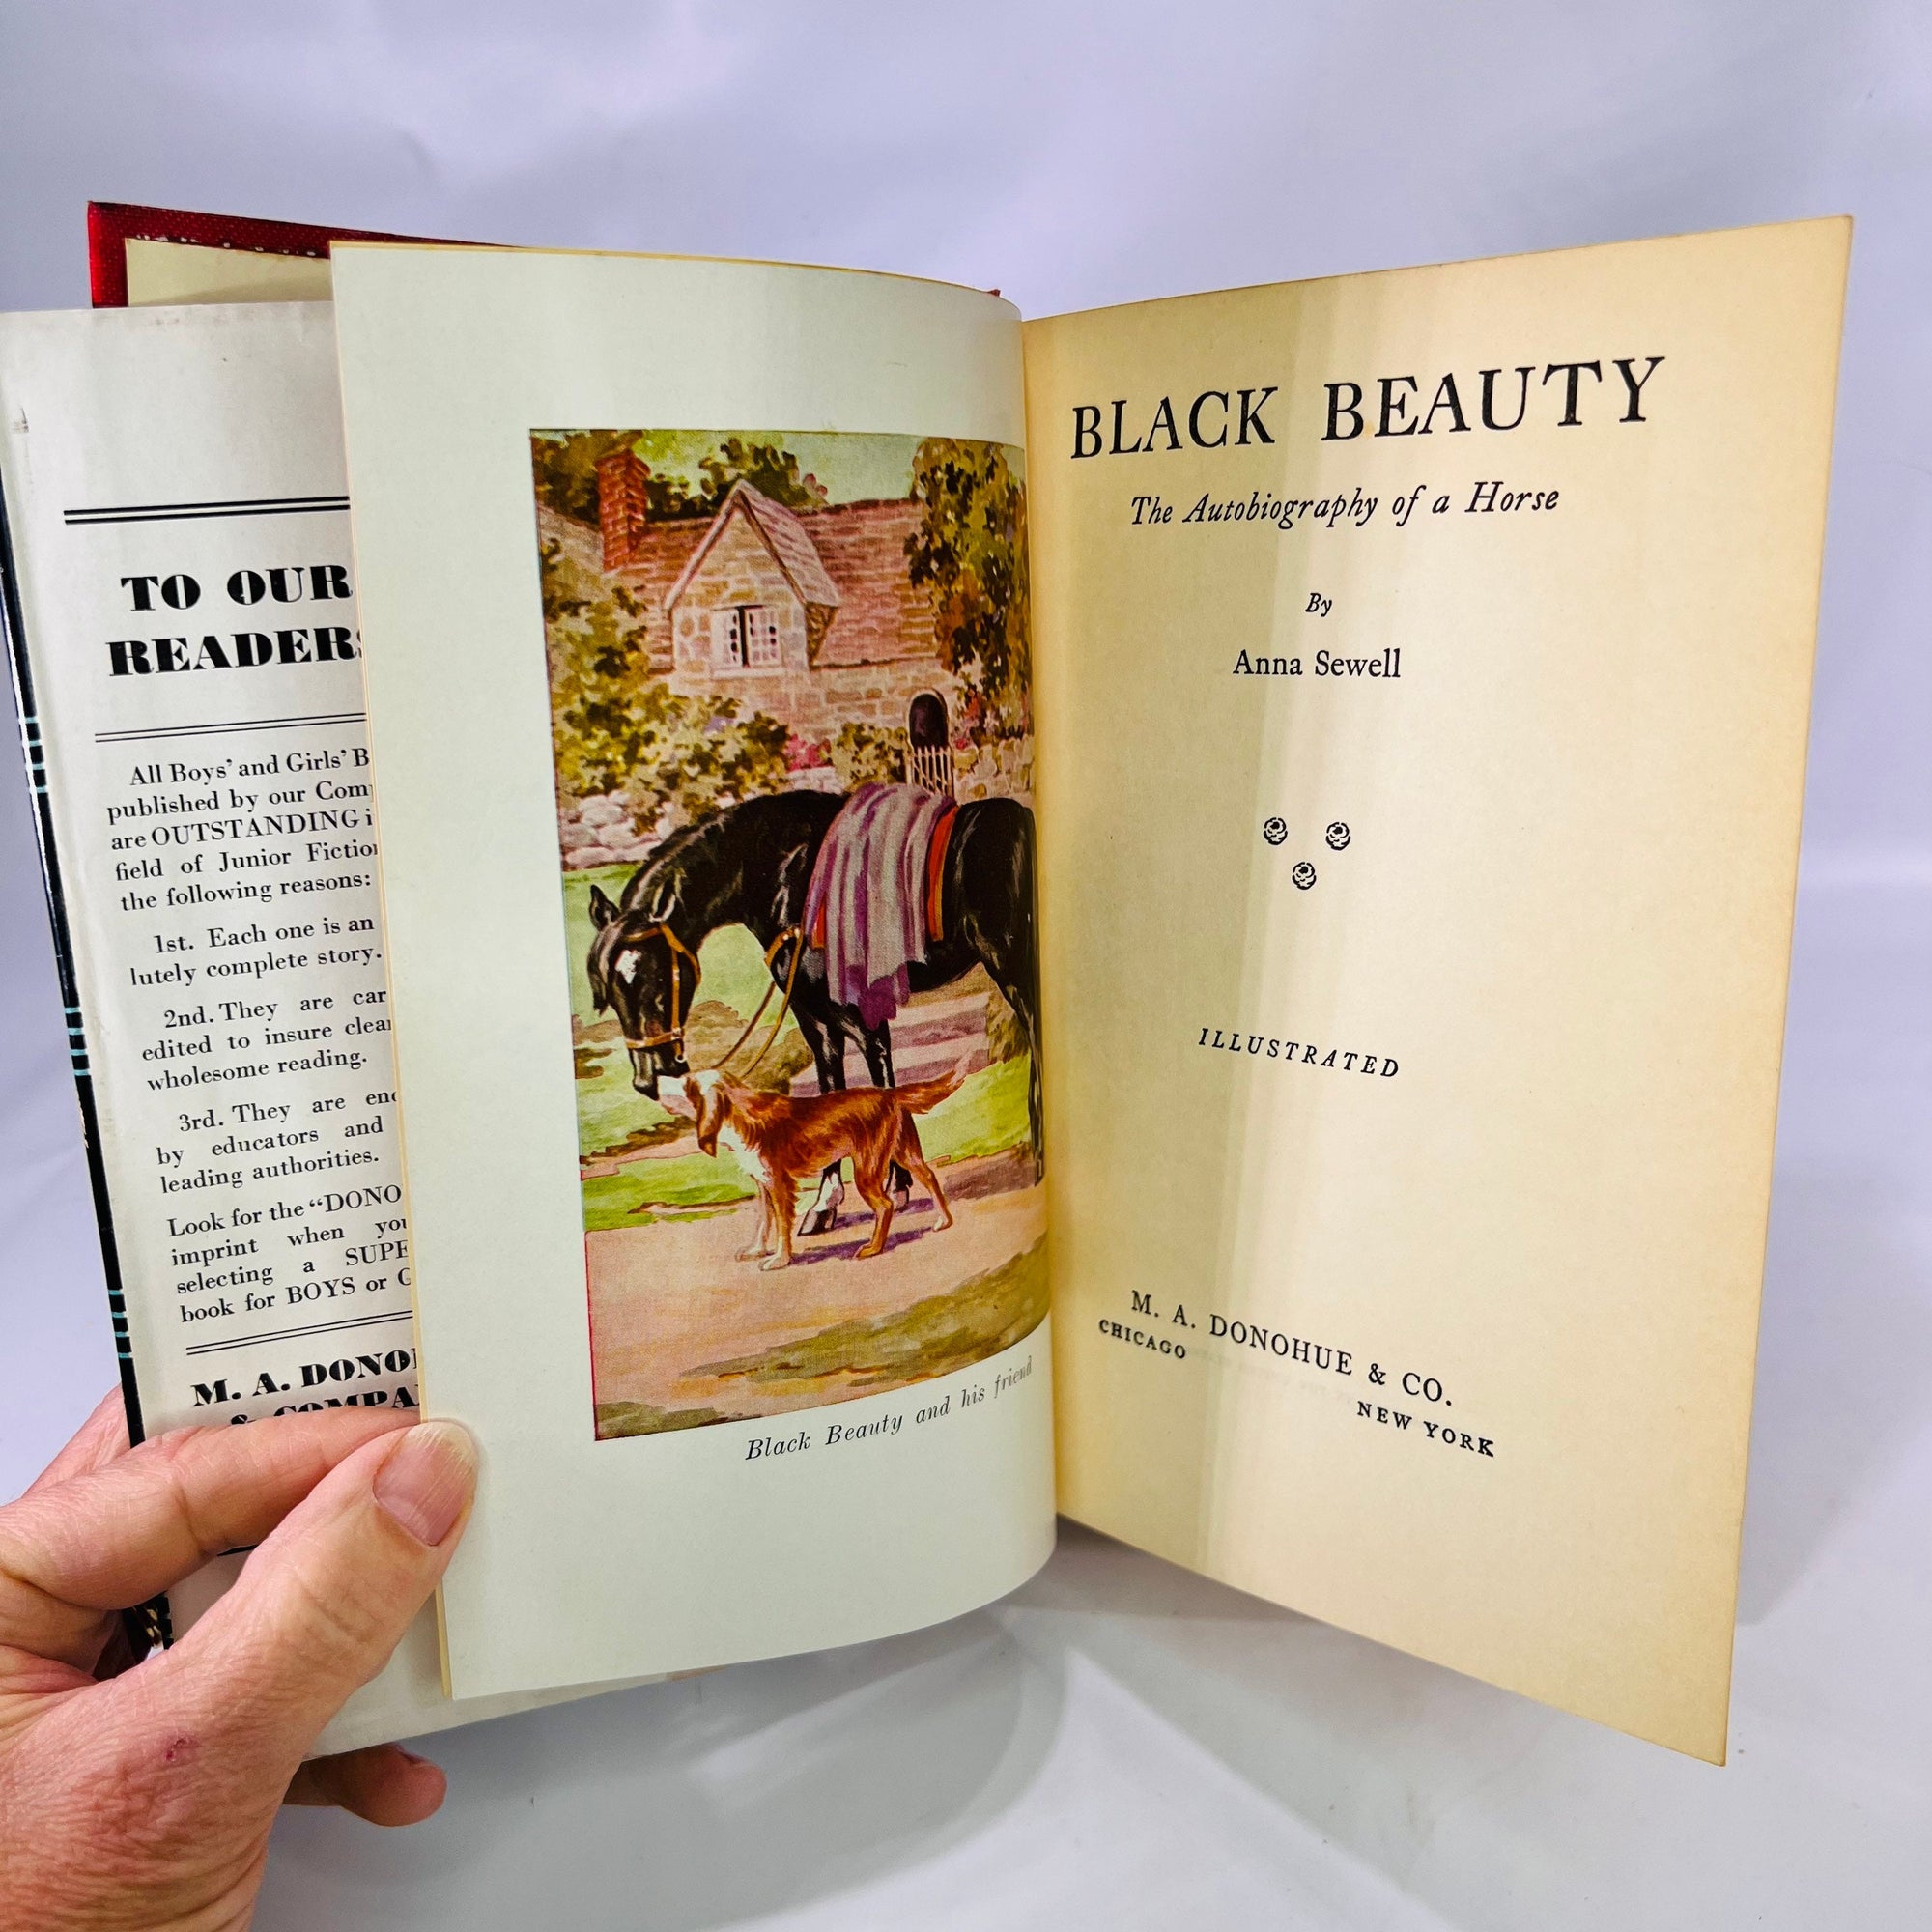 Black Beauty the Autobiography of a Horse by Anna Sewell M. A Donohue & Co